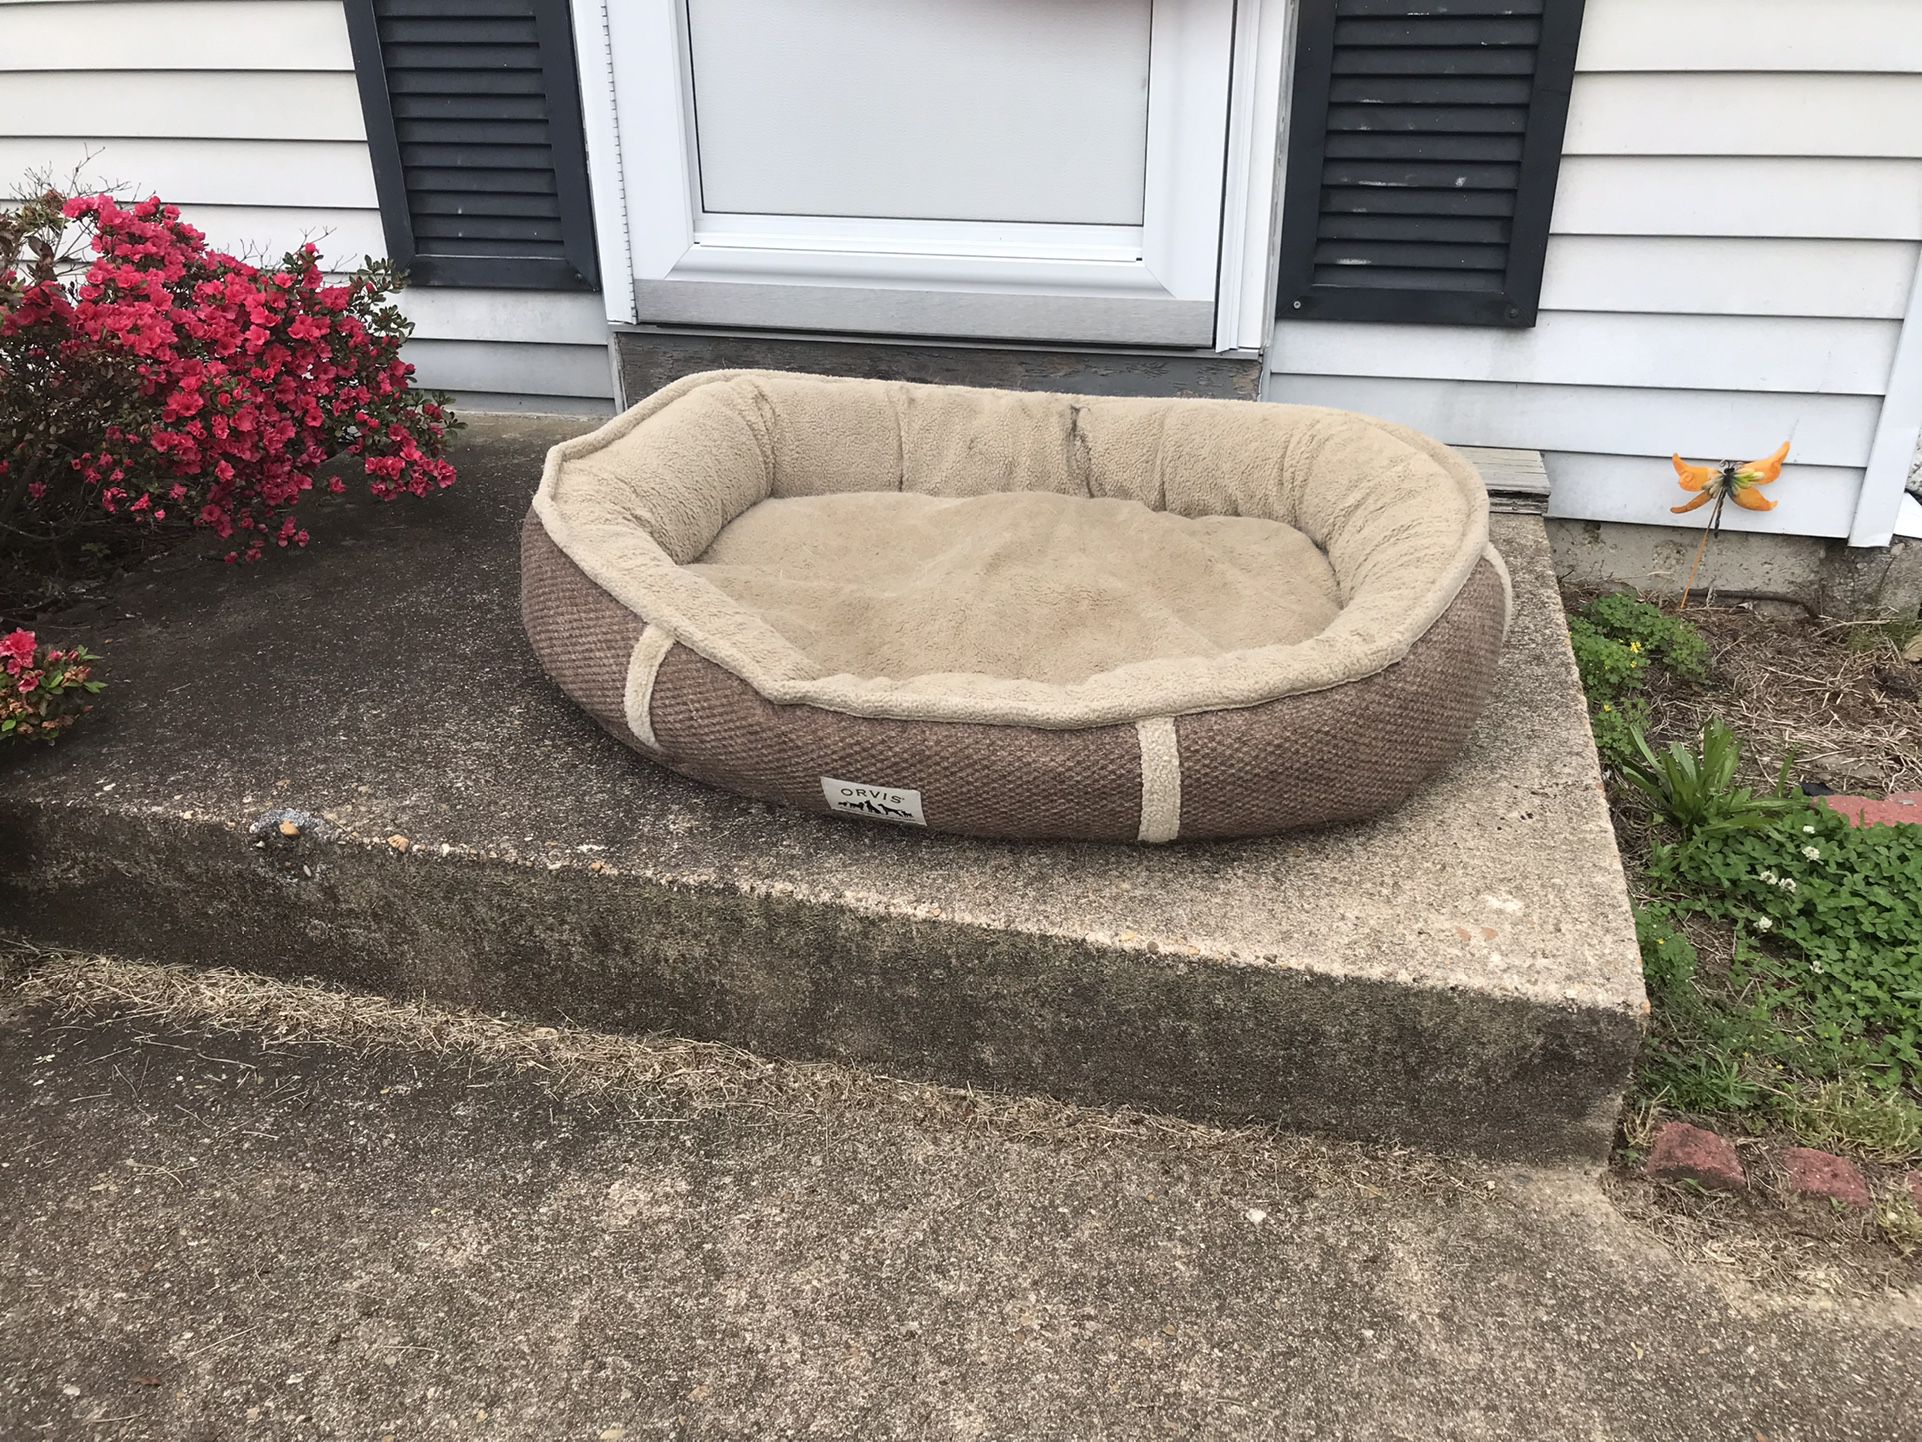 Nice Large High Quality pet bed only $20 firm